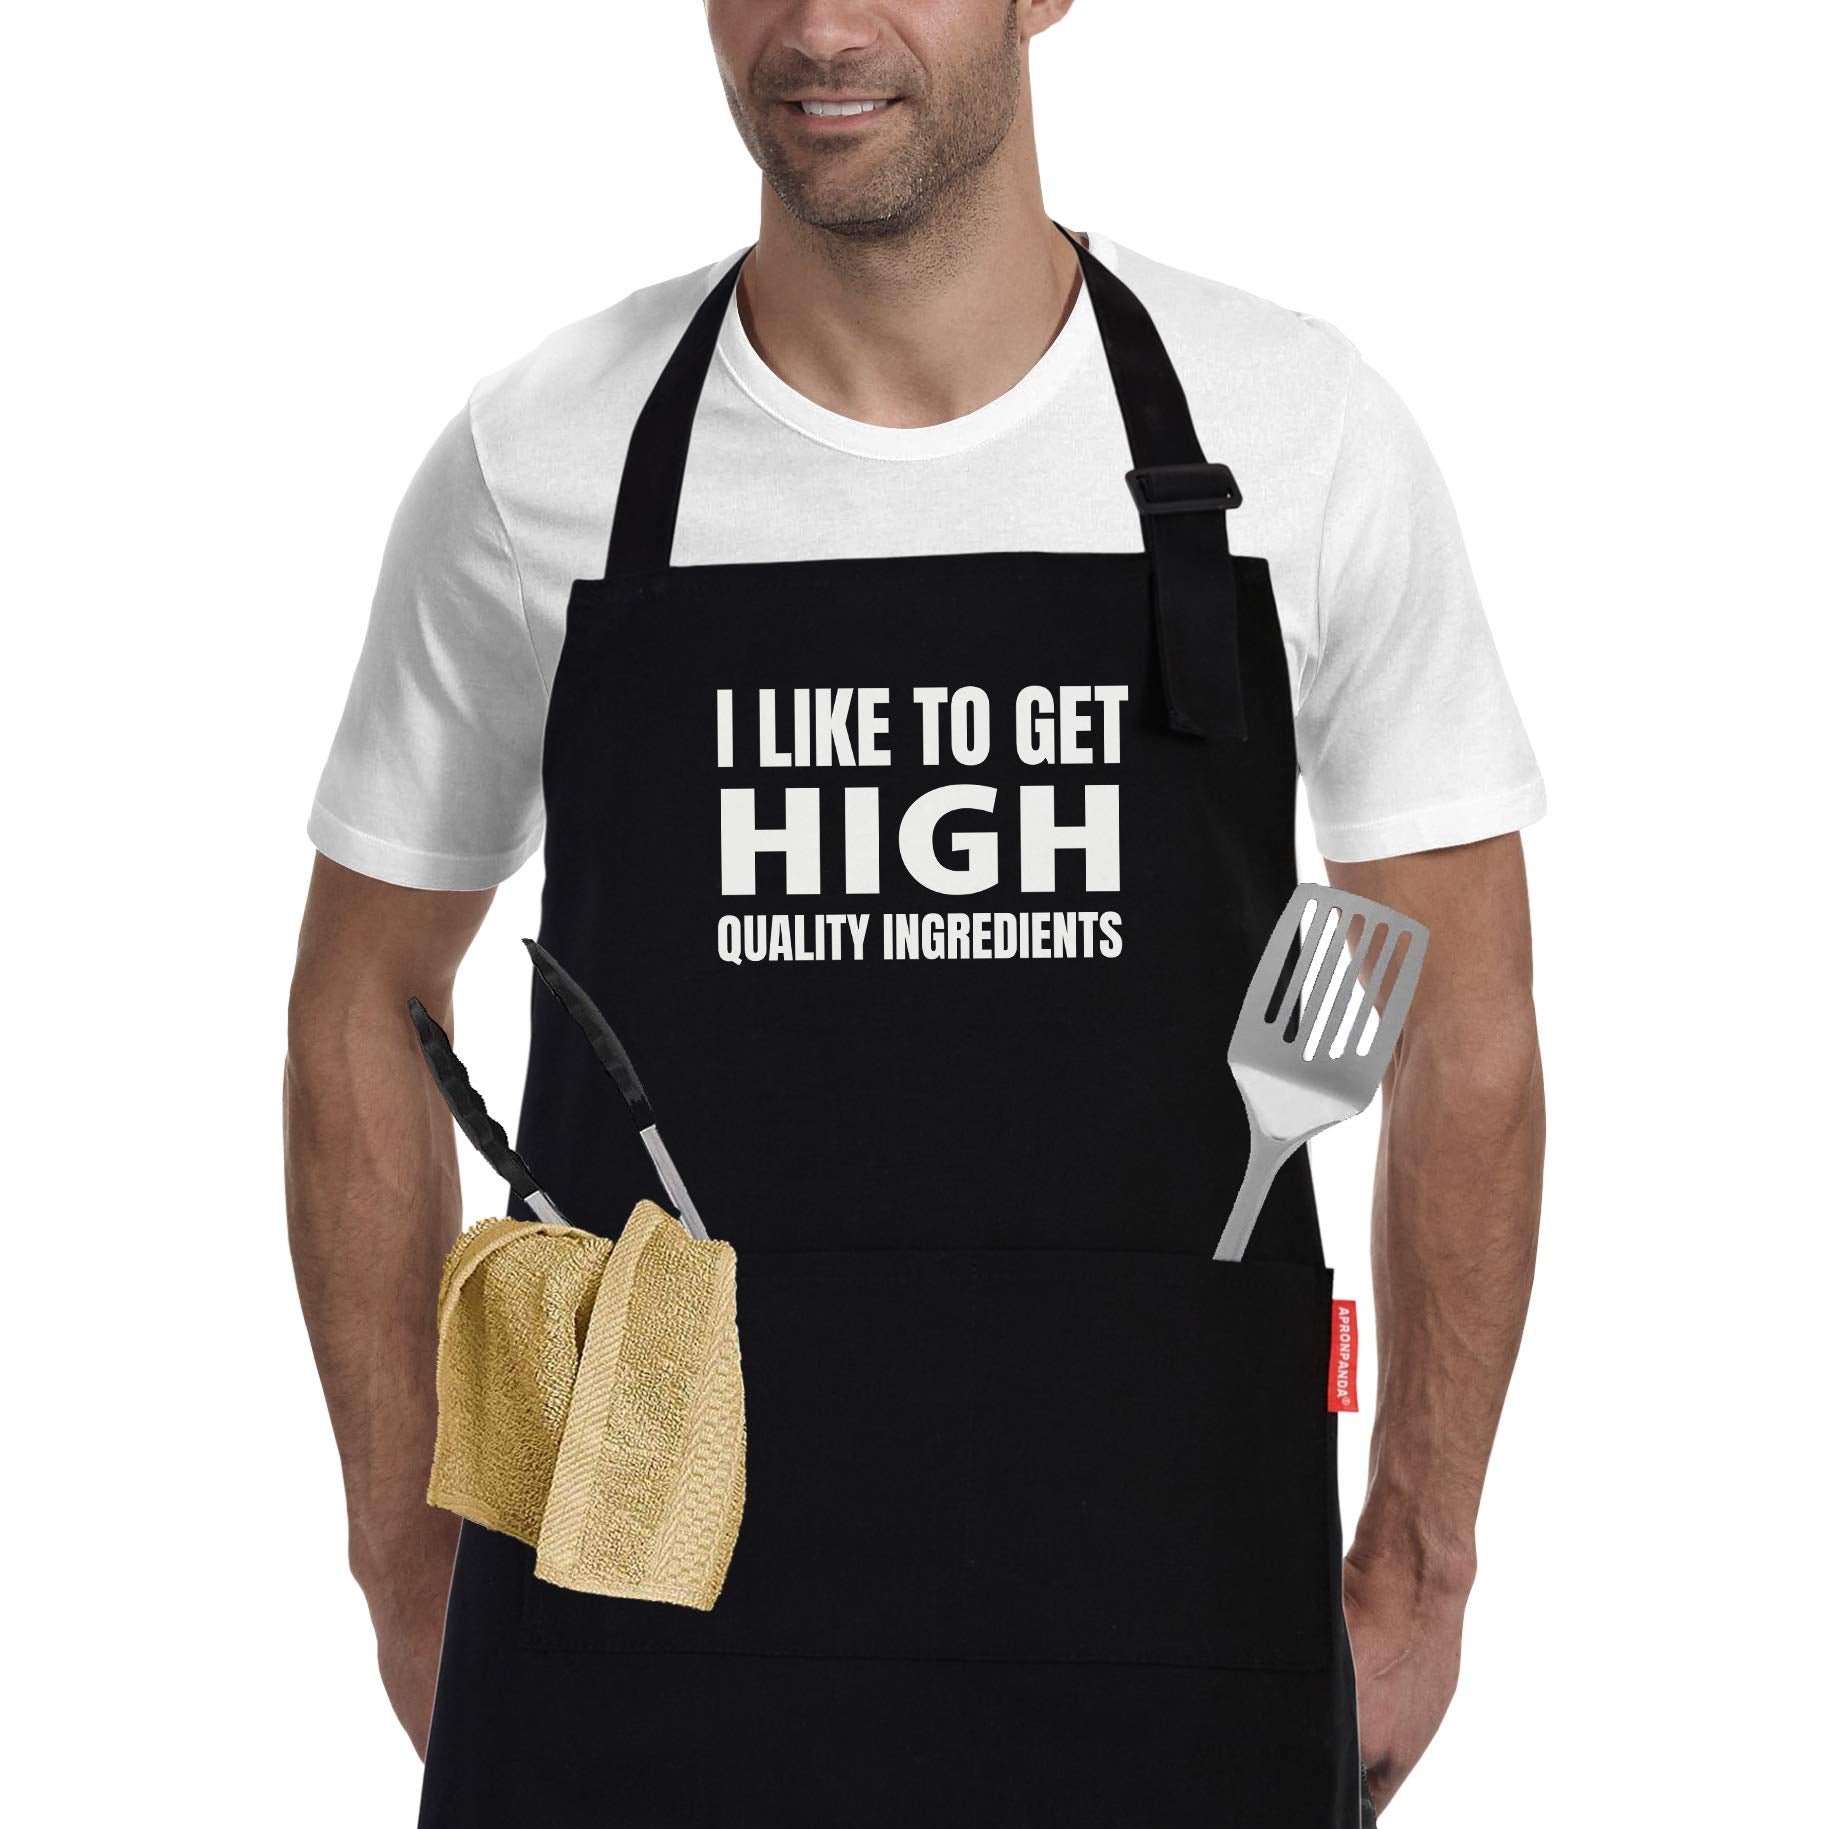 Kitchen Cooking Aprons for Men Women-I Like To Get High Ingredients, Adjustable BBQ Funny Apron with 2 Pockets, Birthday Thanksgiving Christmas Apron Gifts for Mom Wife Husband Girlfriend